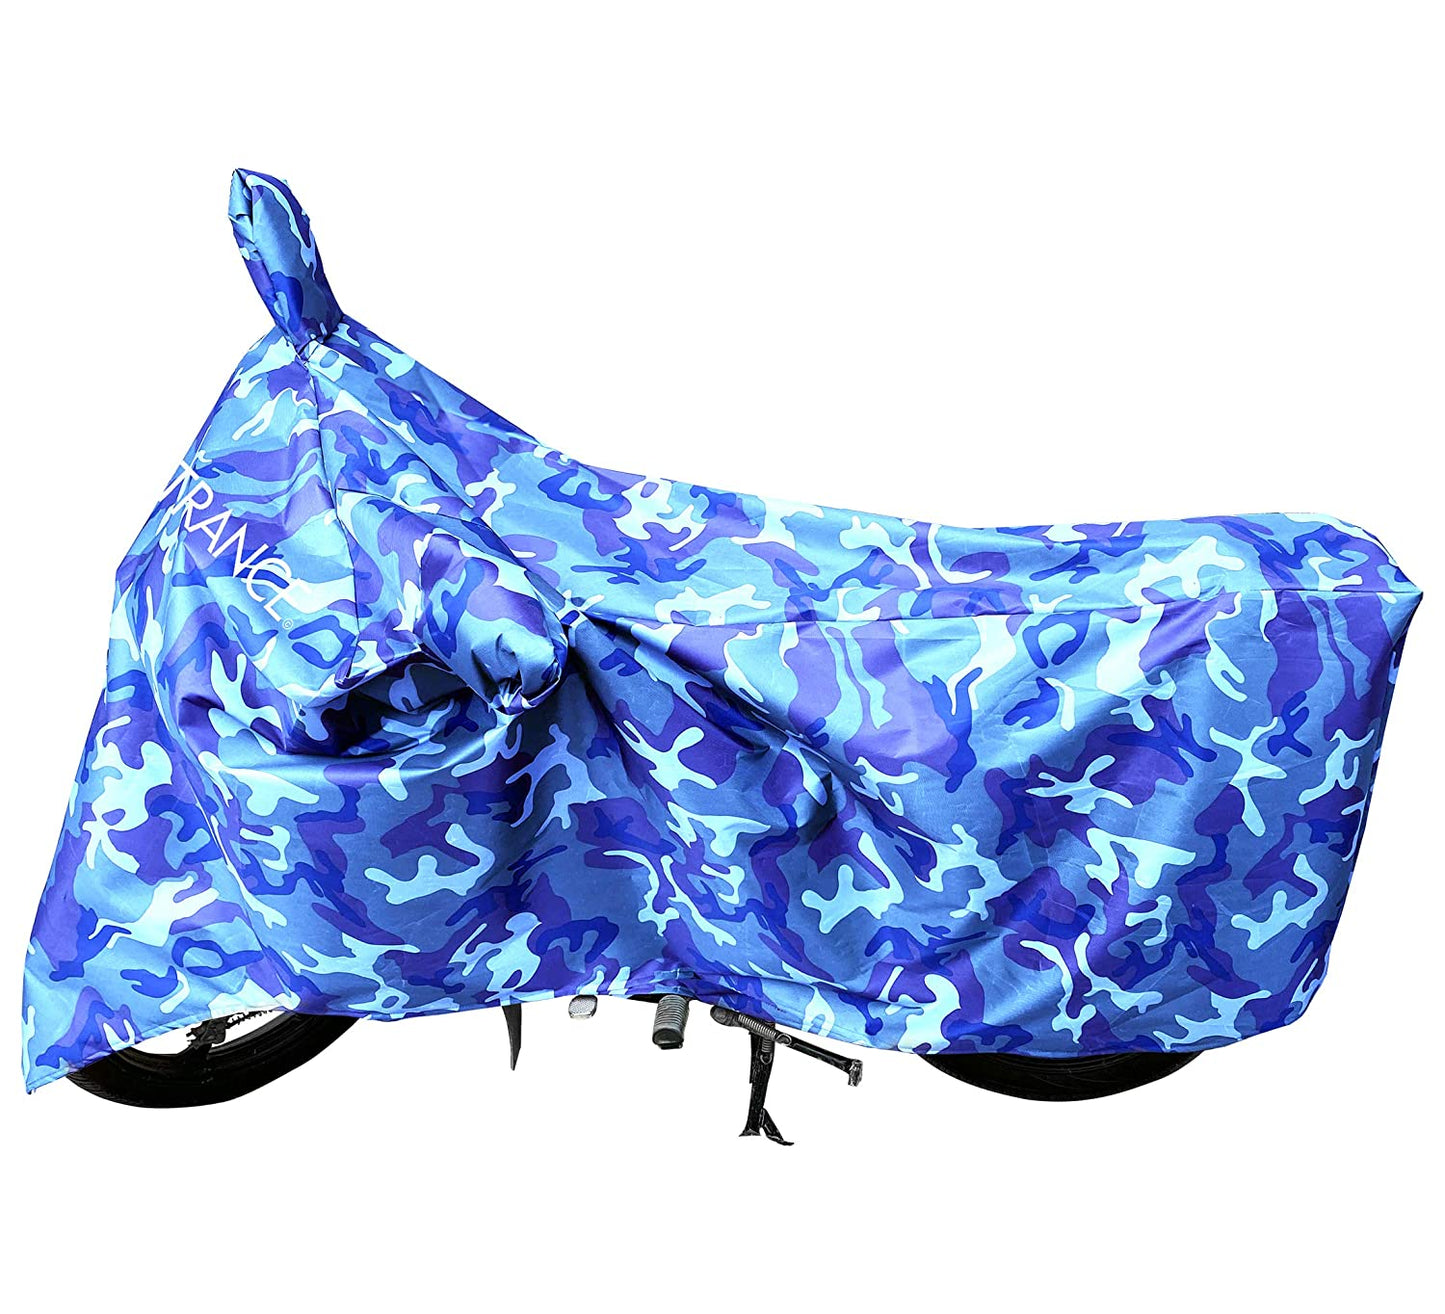 MotoTrance Jungle Bike Body Covers For TVS Streak - Interlock-Stitched Waterproof and Heat Resistant with Mirror Pockets